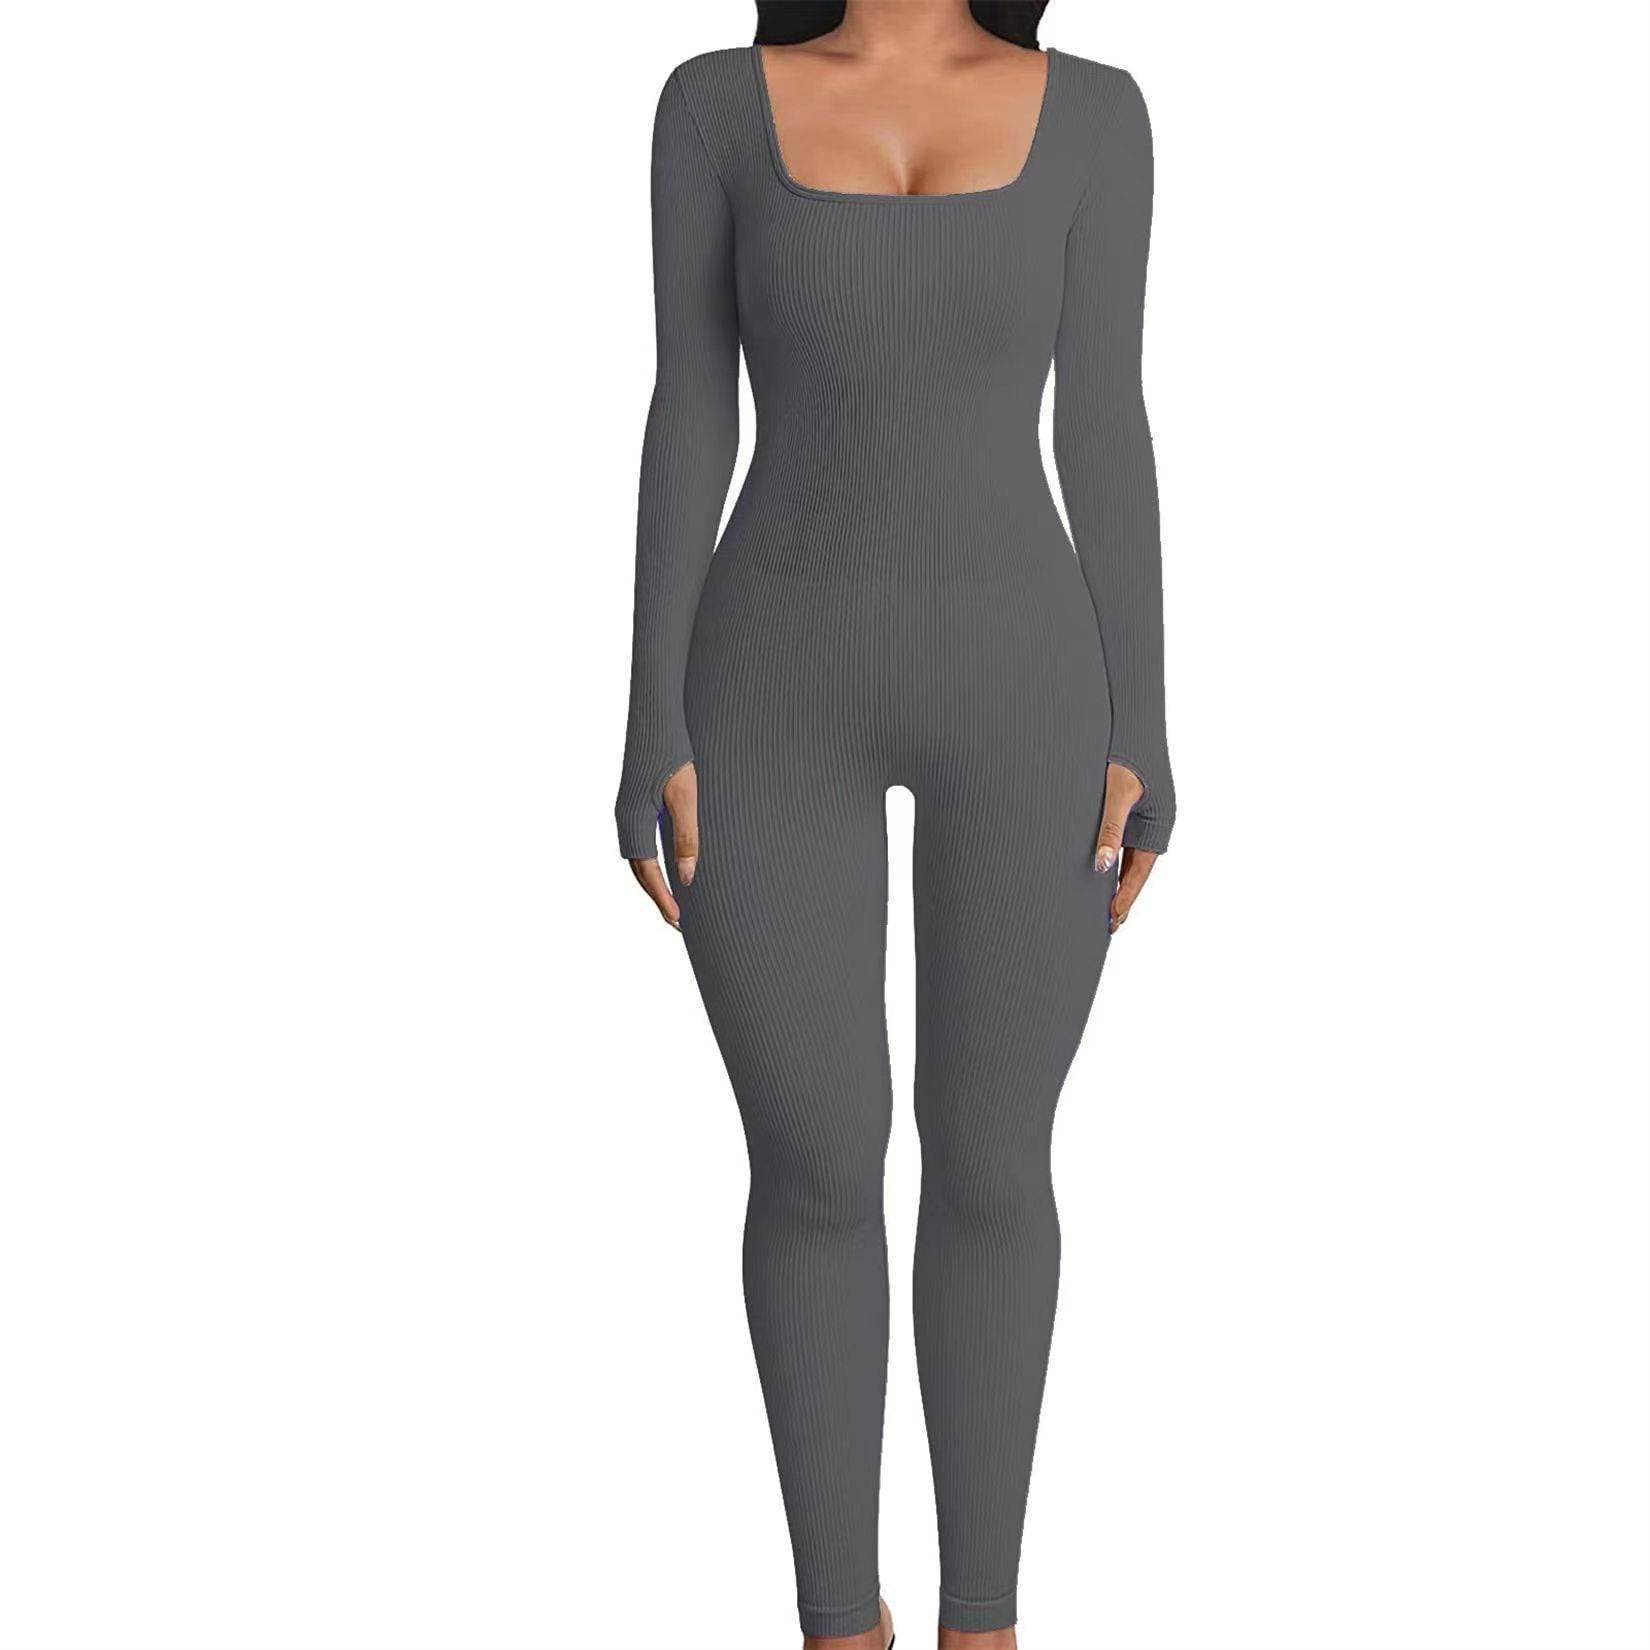 Square Neck And Buttocks Lifting Slim Fitting Jumpsuit-Dark grey-12